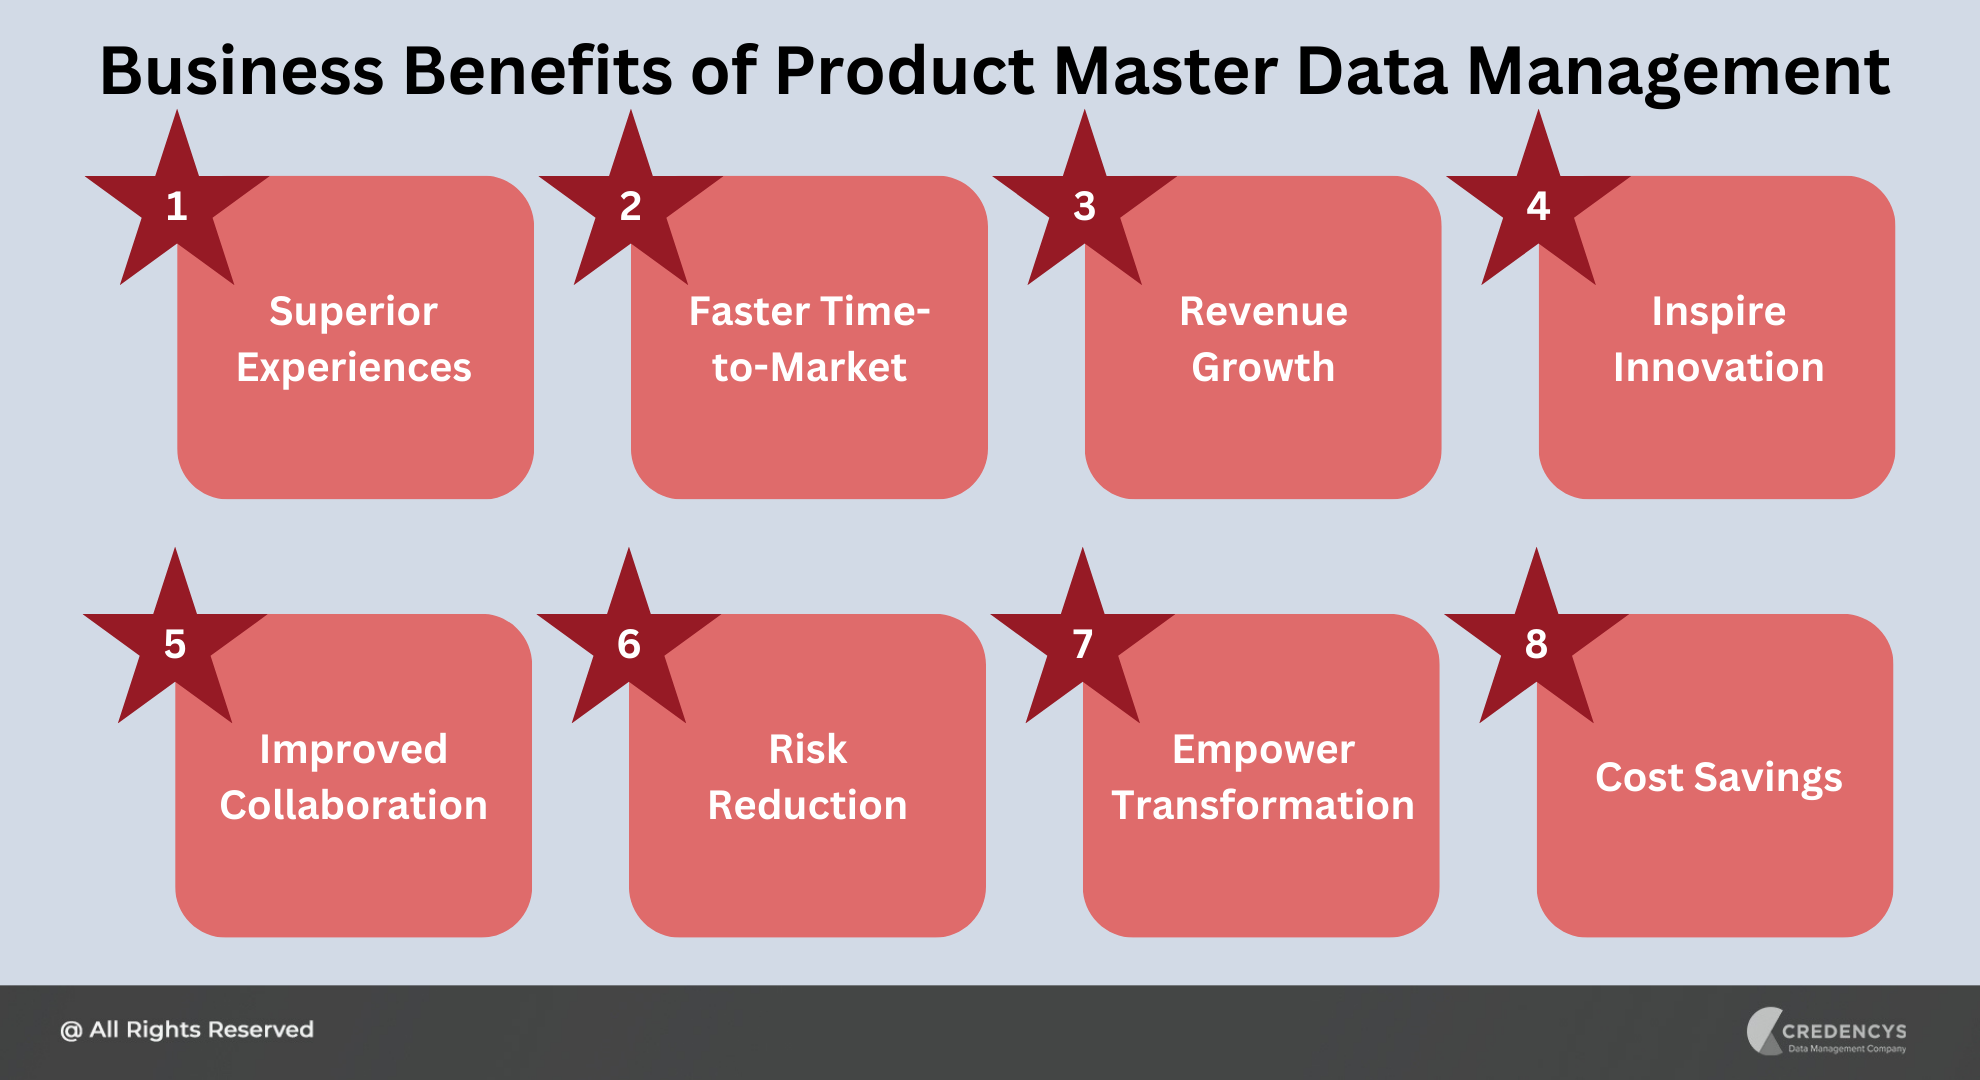 Business Benefits of Product Master Data Management